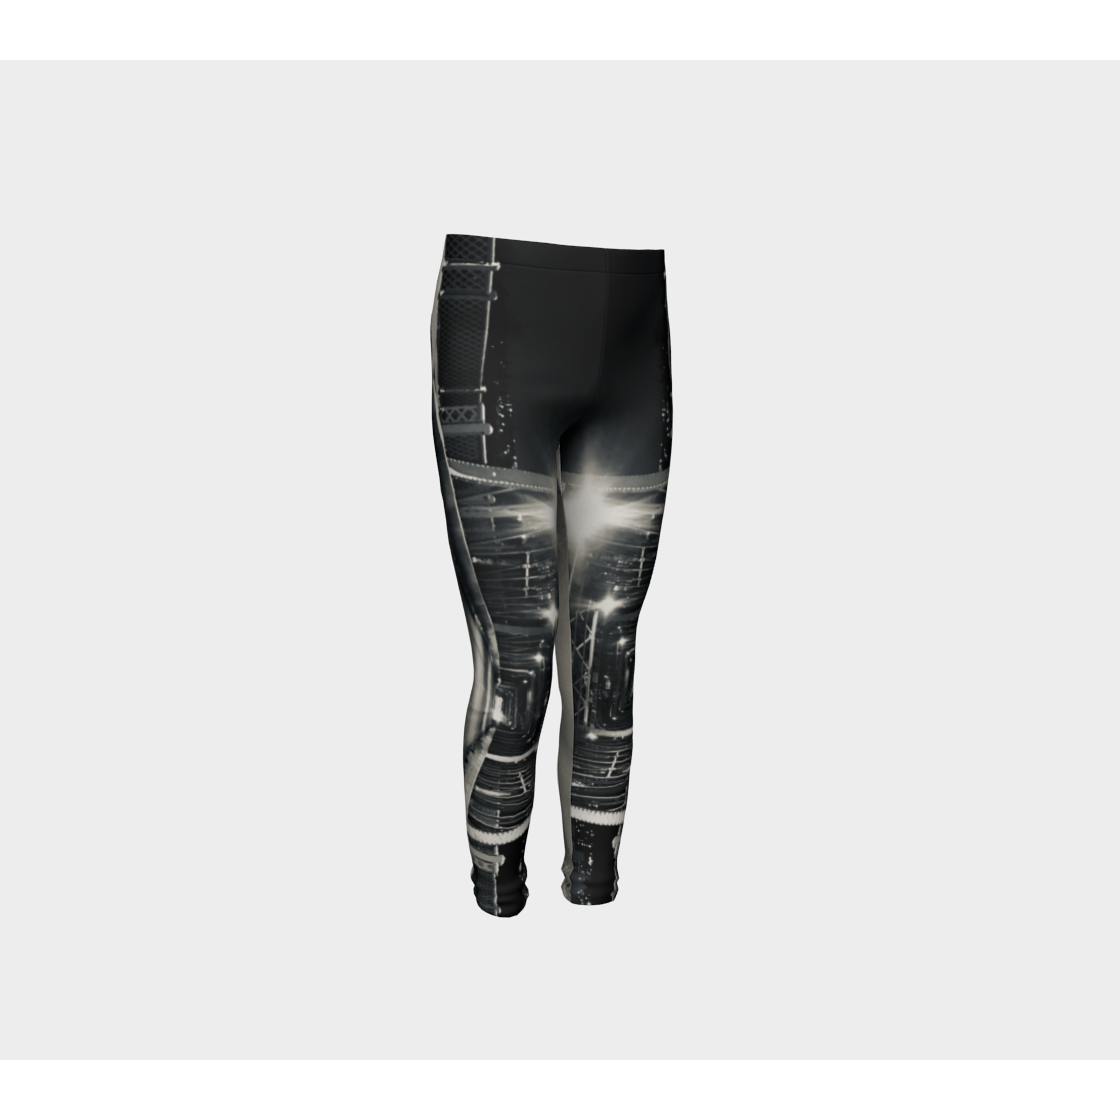 Youth Leggings for girls with: Bridge at Night Design, 4-5 Years, Front